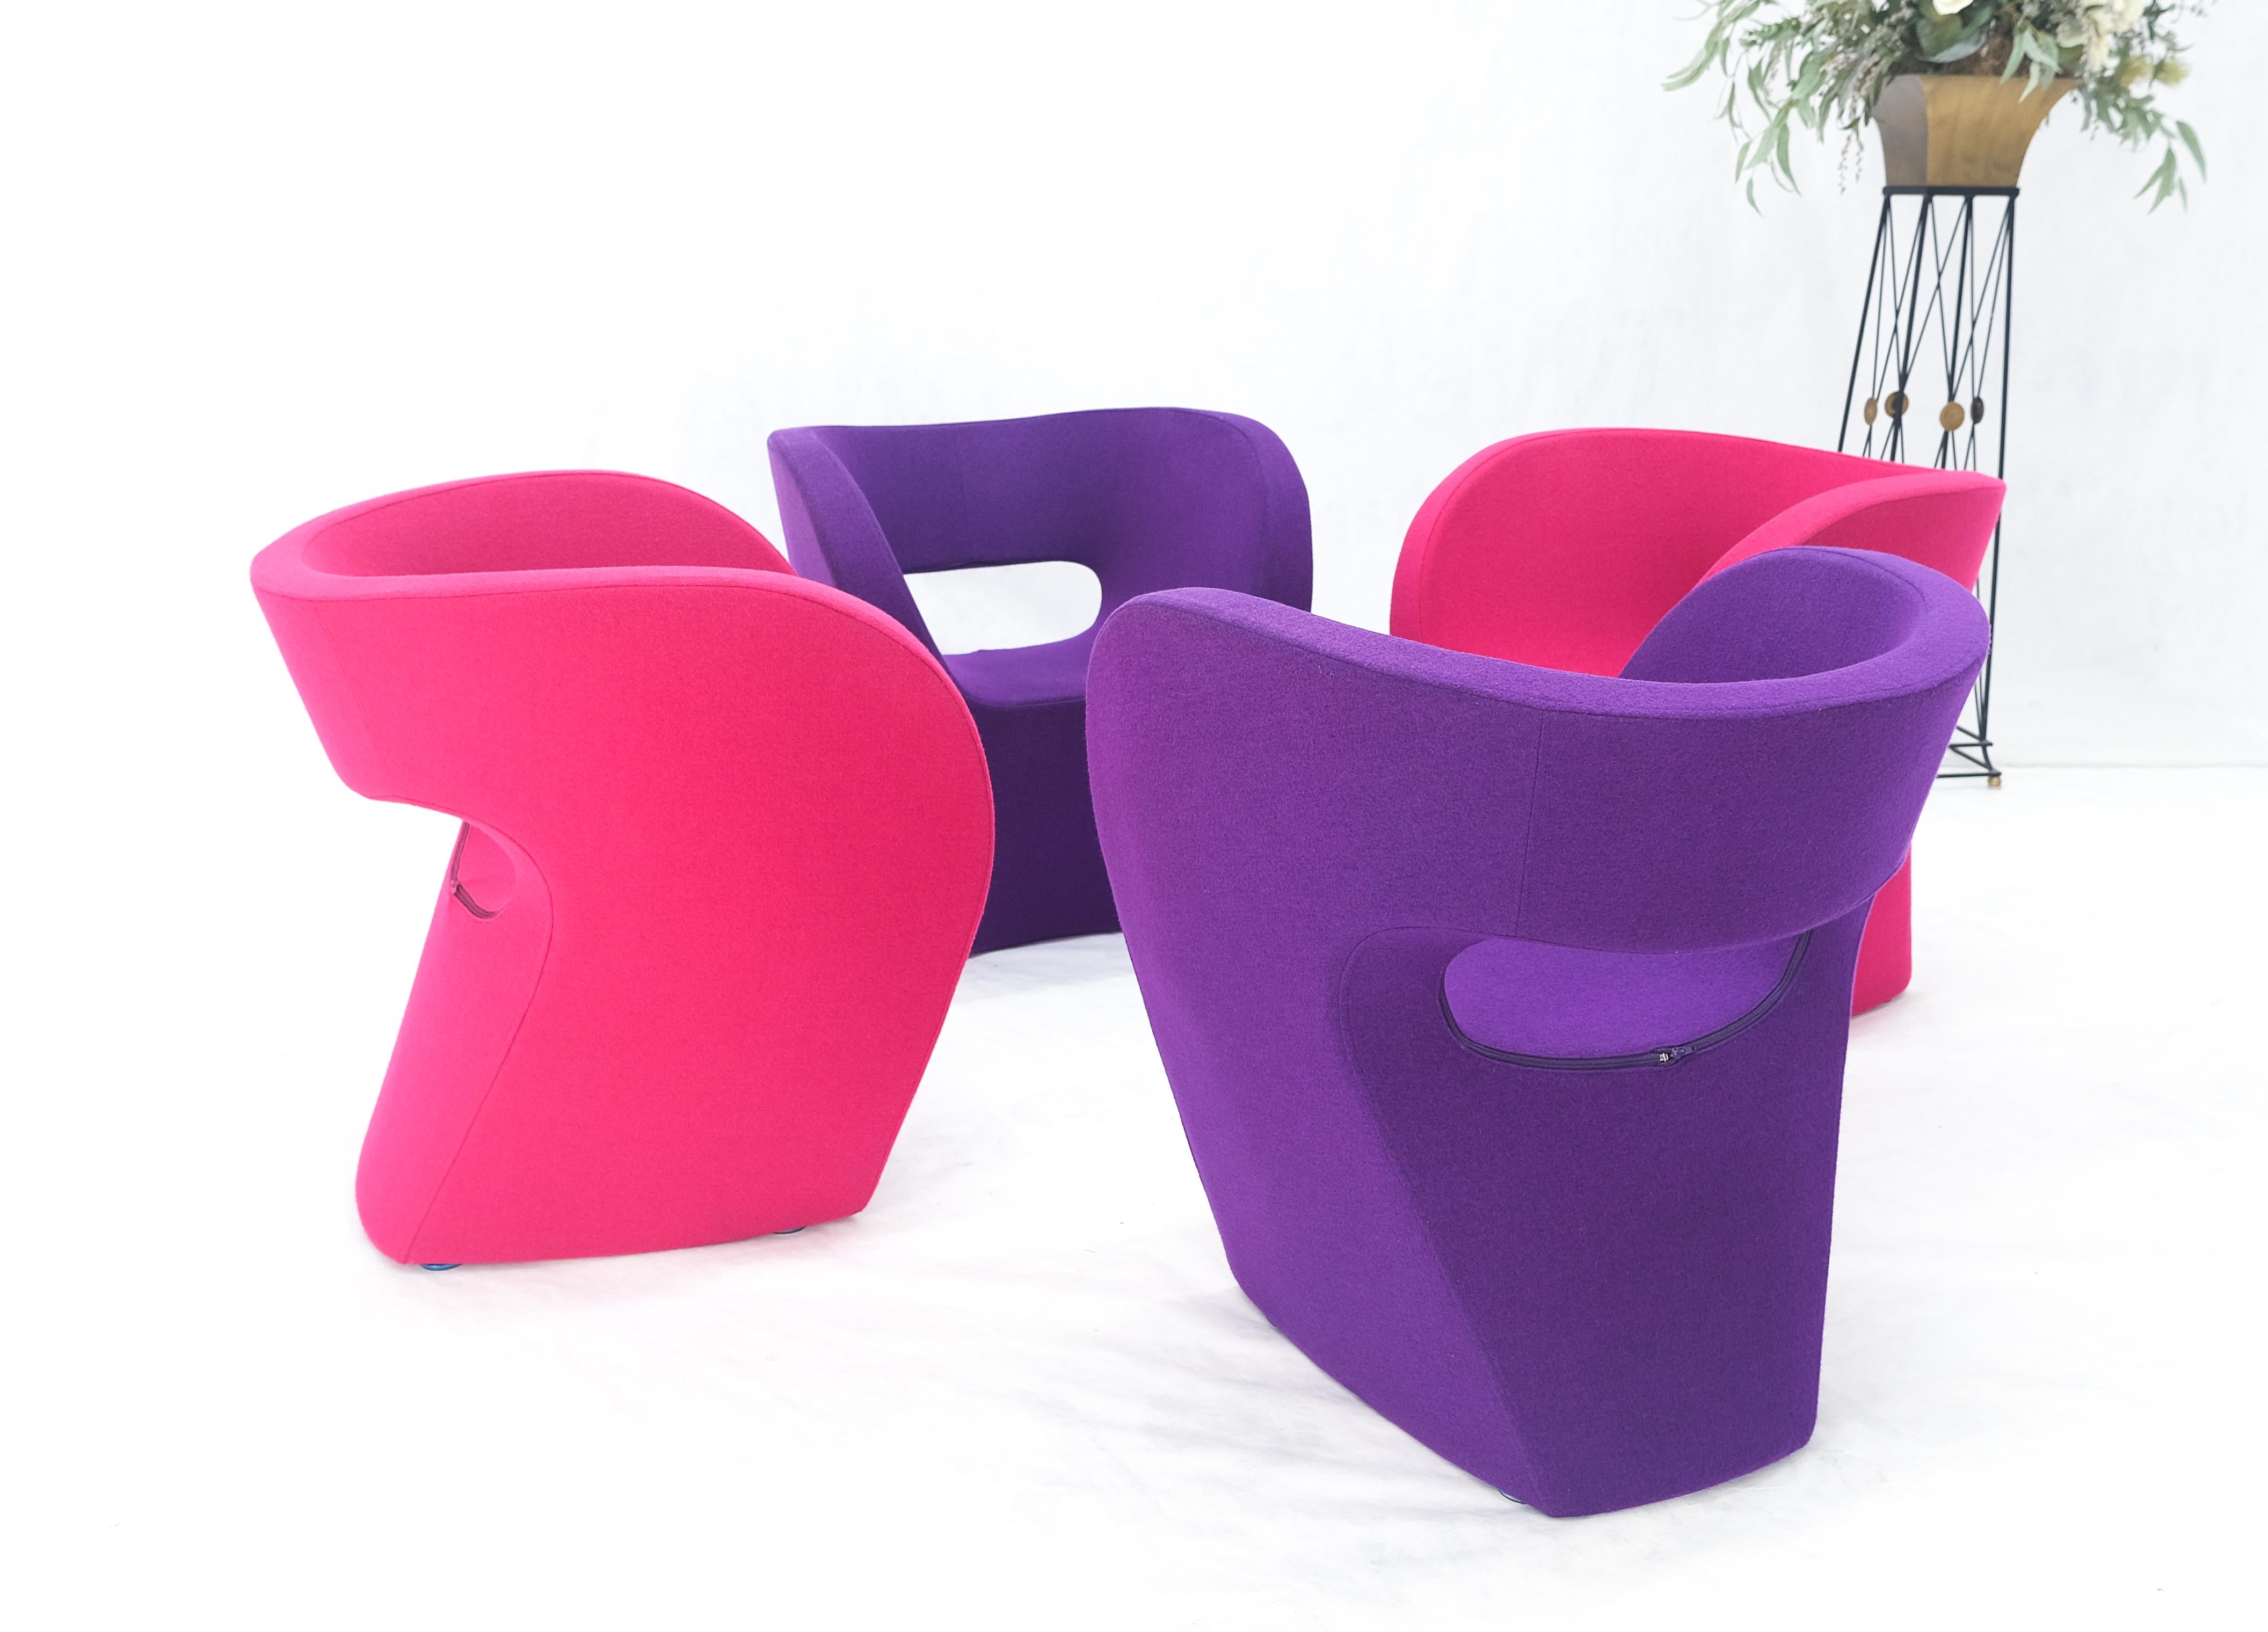 Set 4 Albert Armchair by Ron Arad for Moroso Purple & Red Wool Upholstery MINT! For Sale 4